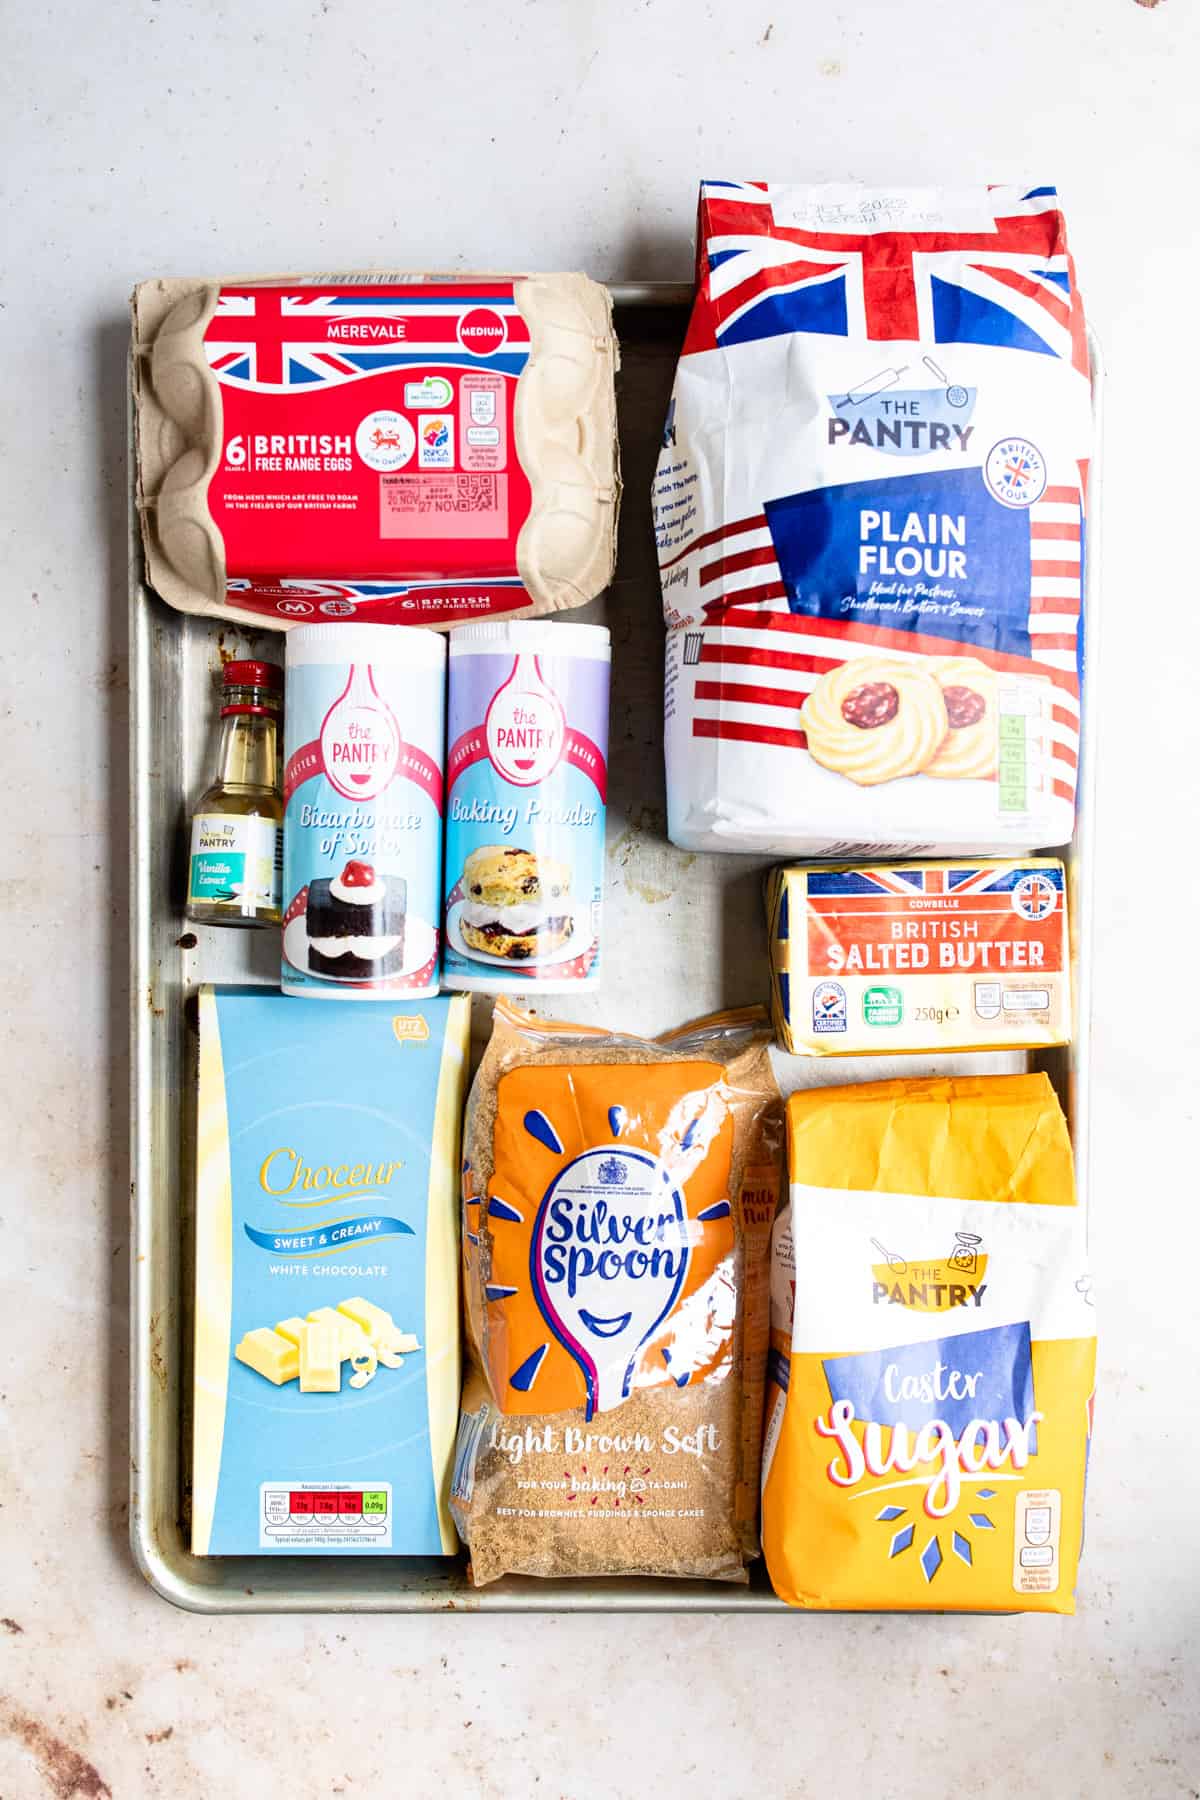 Aldi ingredients for cookies on a baking tray.